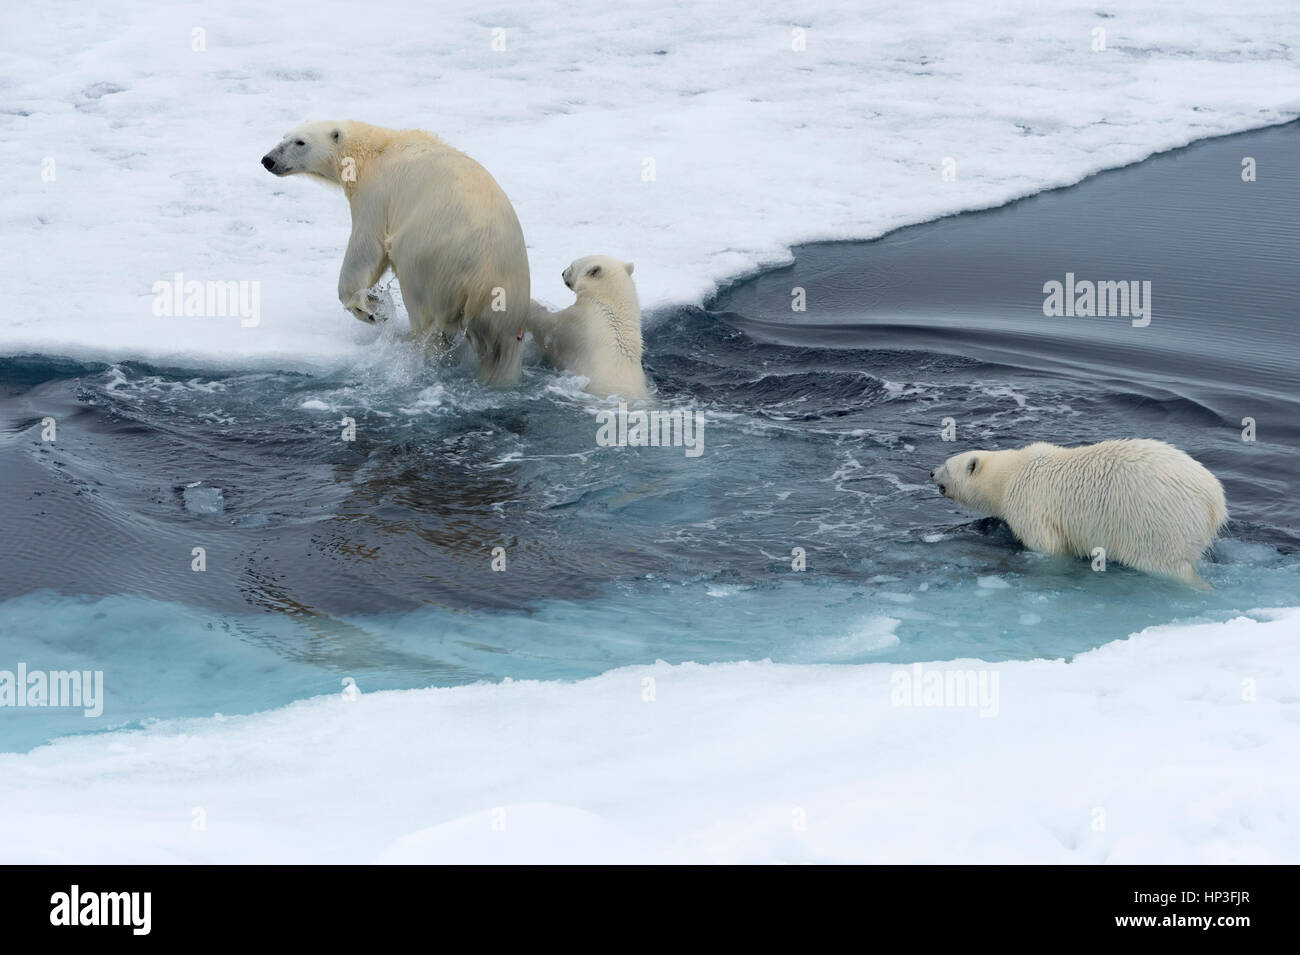 Mother polar bear (Ursus maritimus) with two cubs swimming and jumping over an open ice floe, Spitsbergen Island, Svalbard archipelago, Norway, Europe Stock Photo